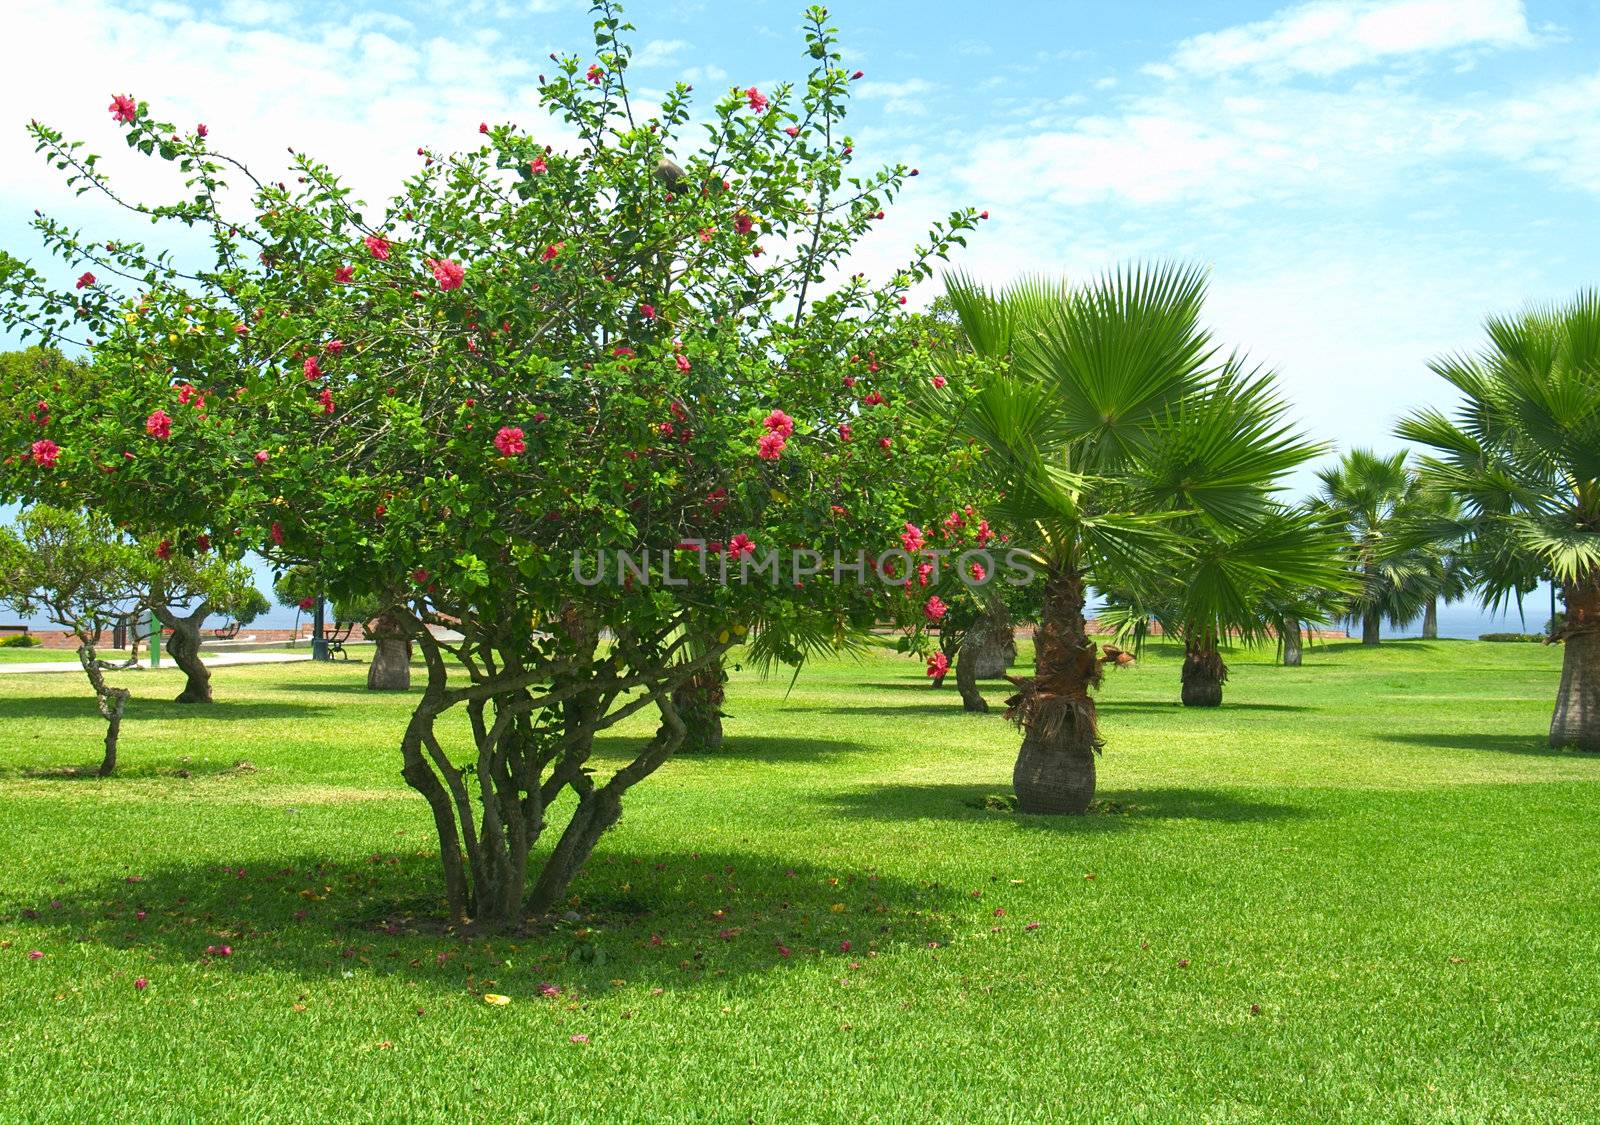 Park with a hibiscus tree and many palm trees on the so-called Costa Verde (Green Coast) in Miraflores, Lima, Peru